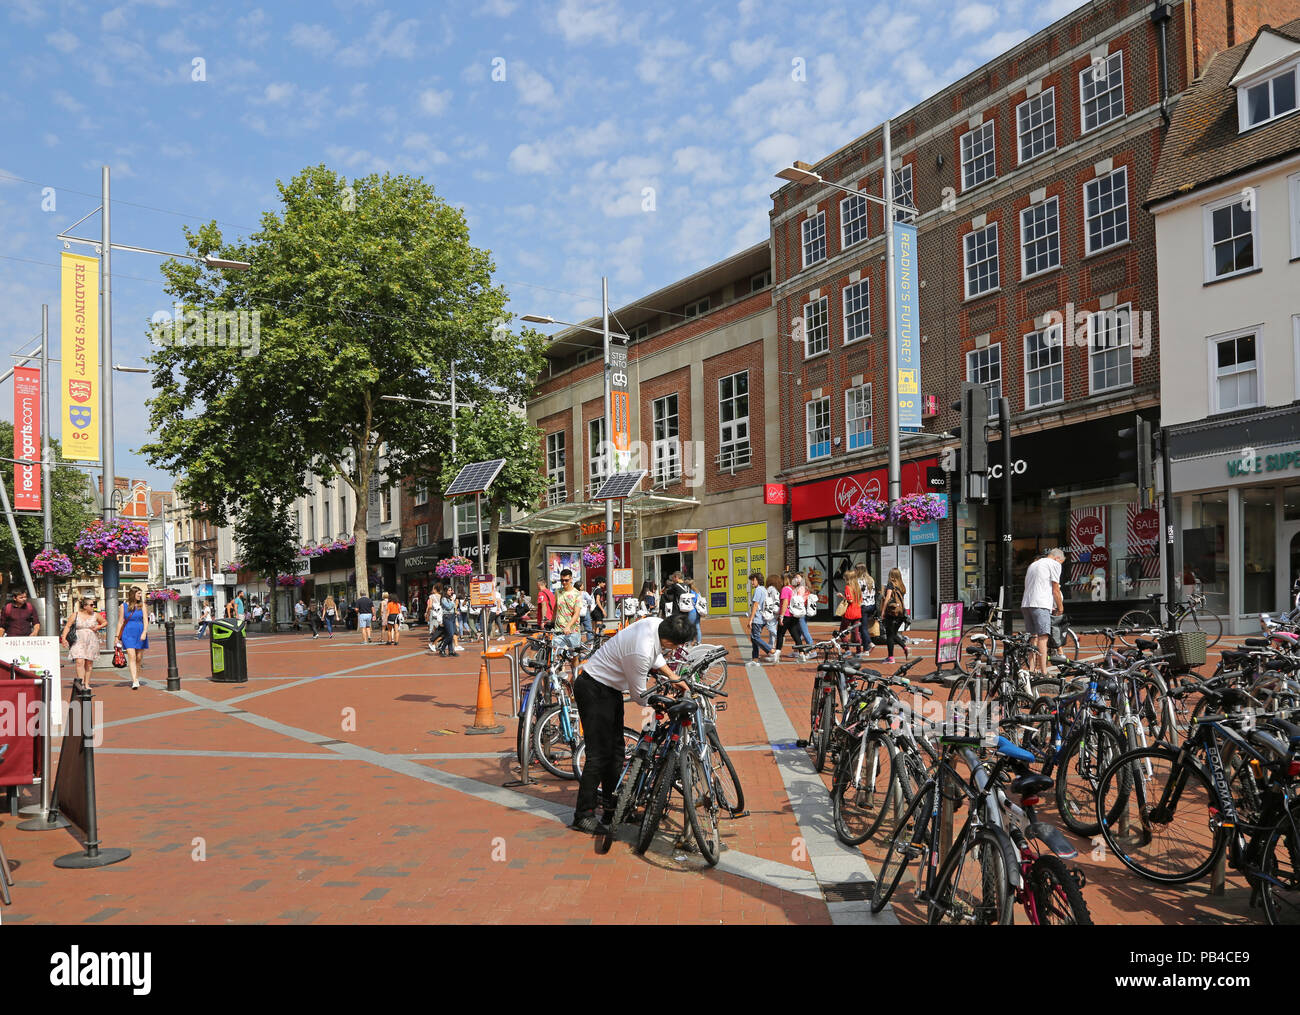 Reading town centre, Berkshire. Pedestrianised section of Broad Street. Shows shoppers, pedestrians and parked bicycles Stock Photo